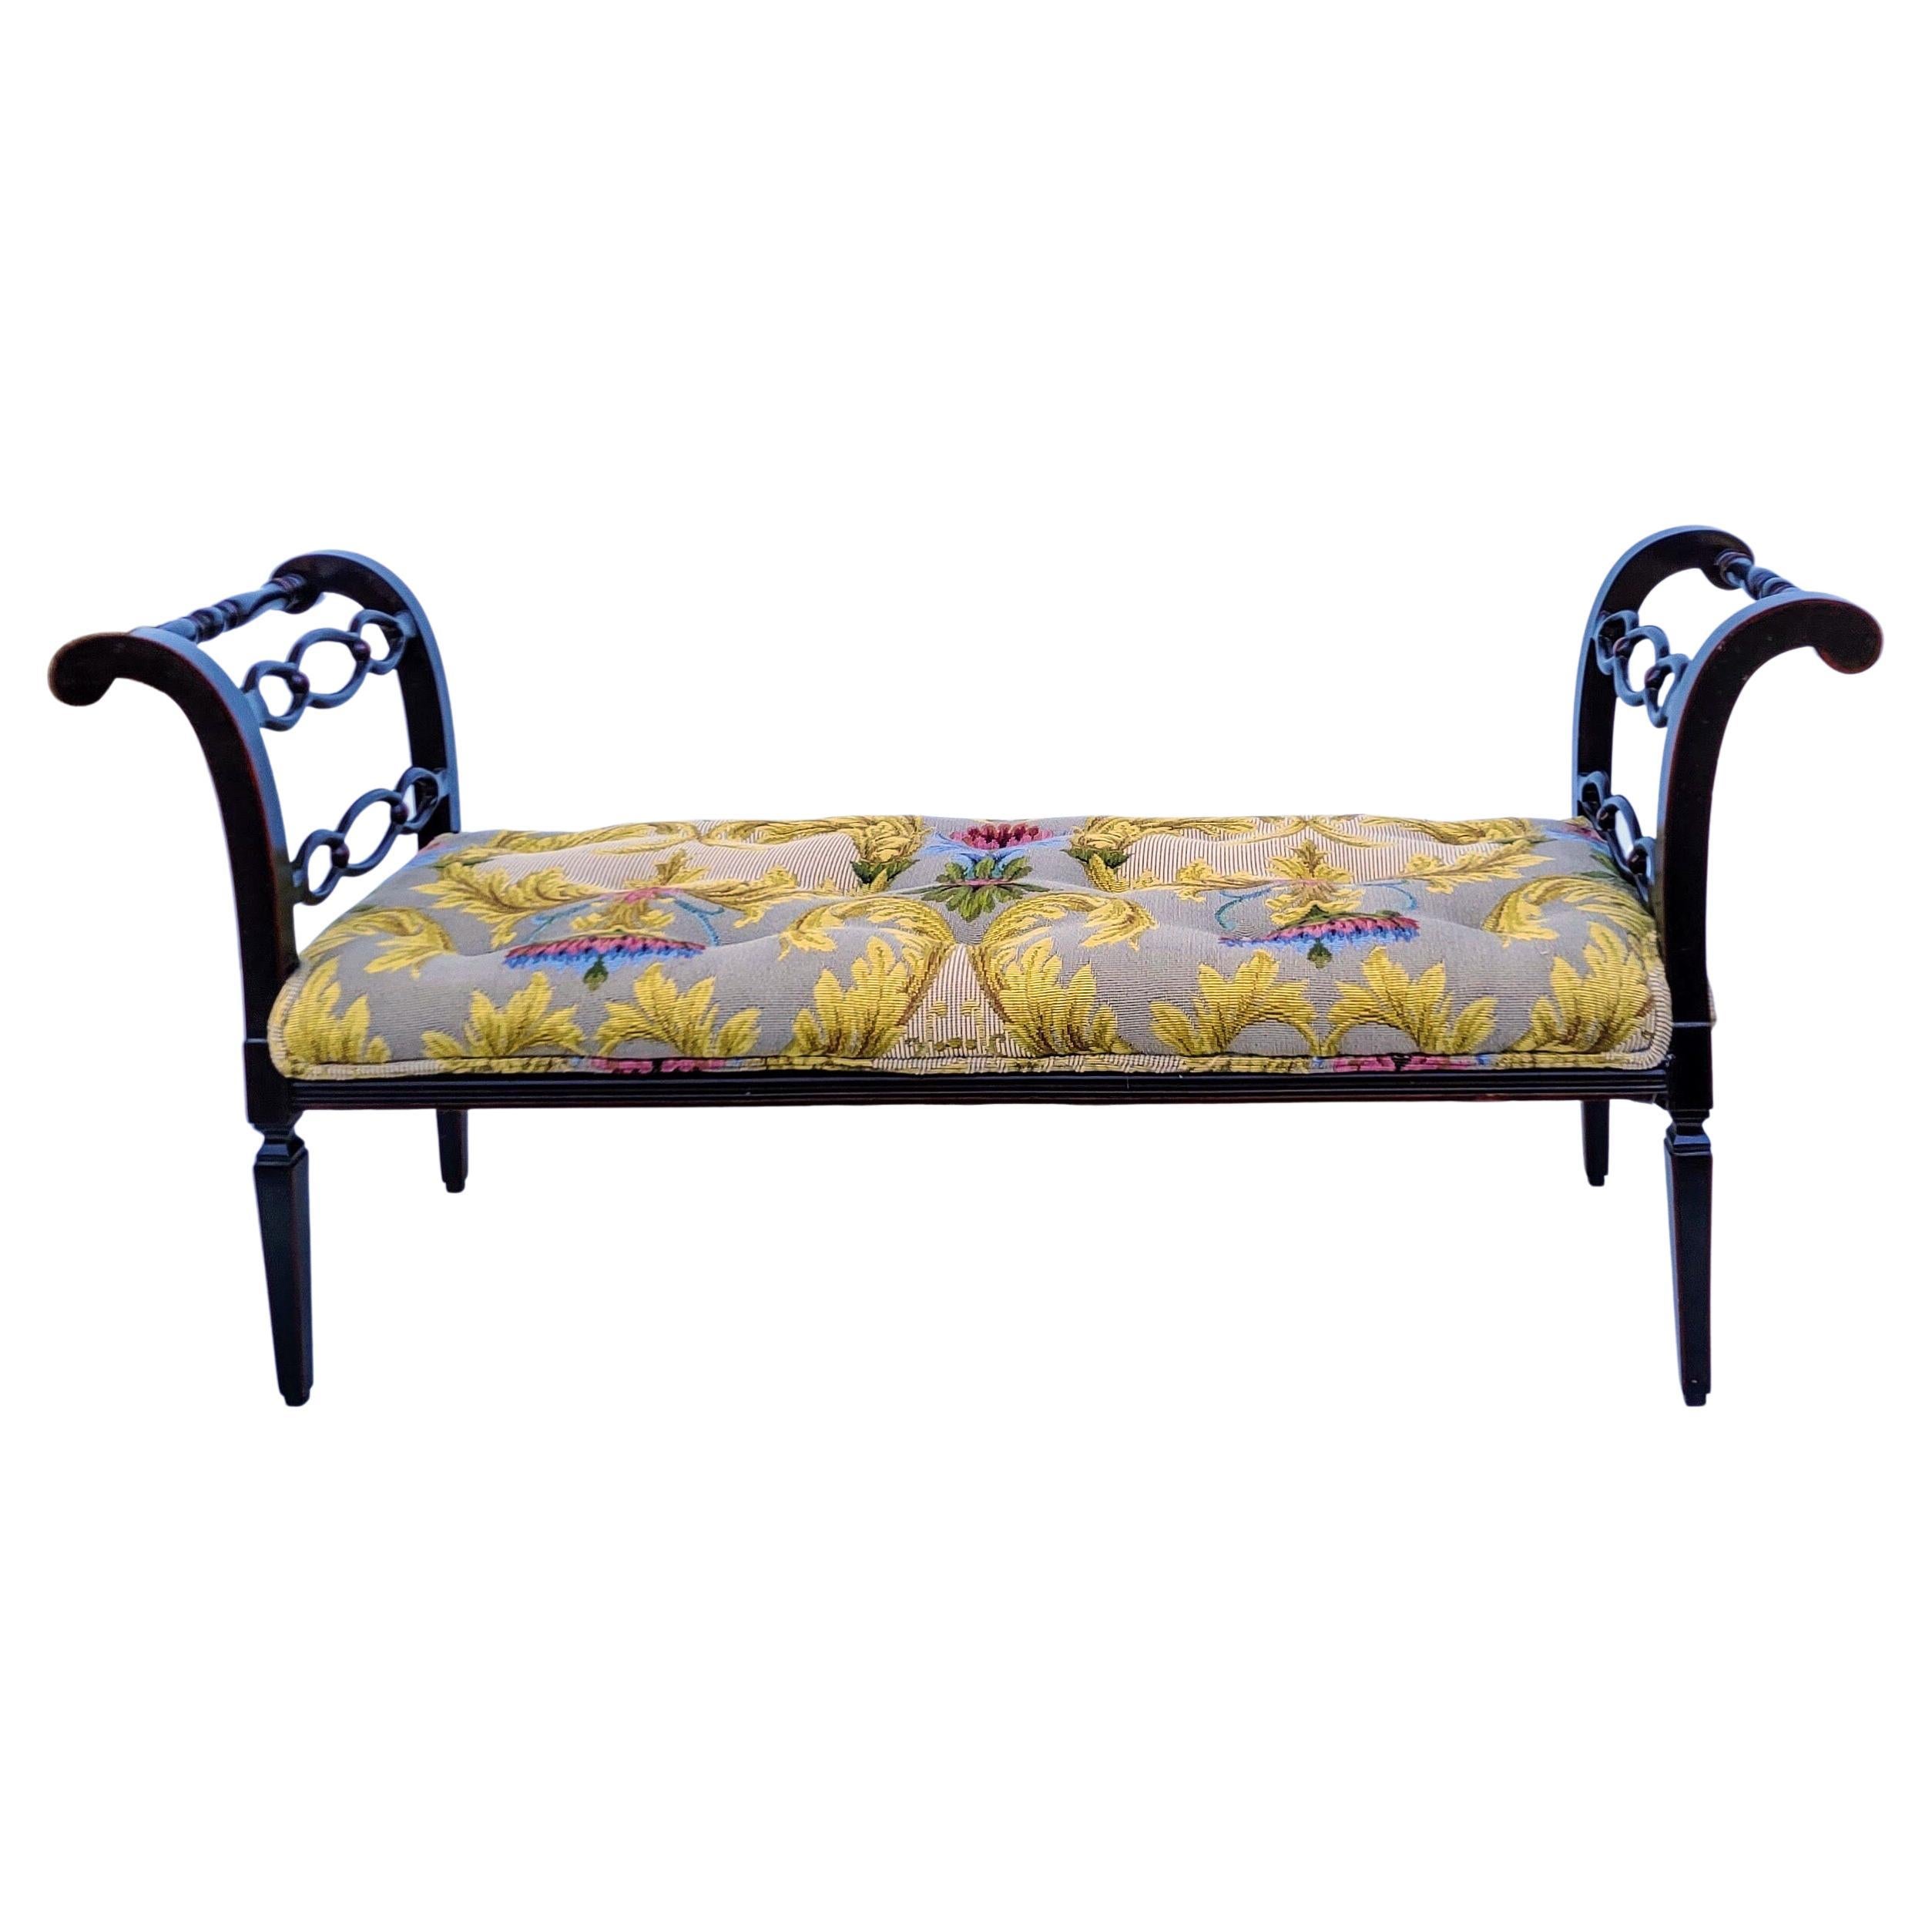 20th-C. Large Scale Painted Black Lacquer Regency Style Bench